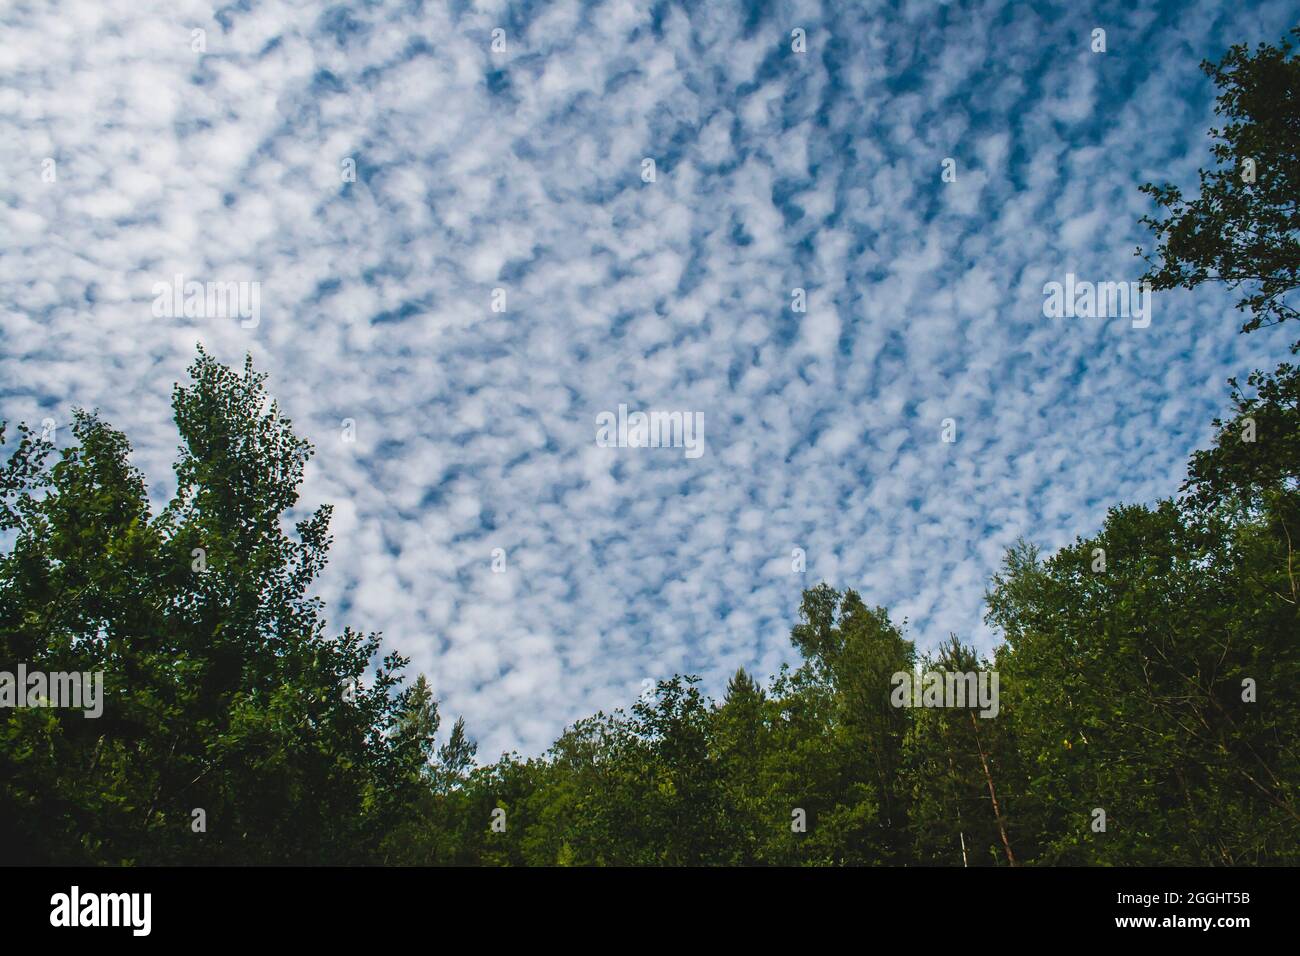 Altocumulus floccus white fluffy clouds covering the blue sky Stock Photo